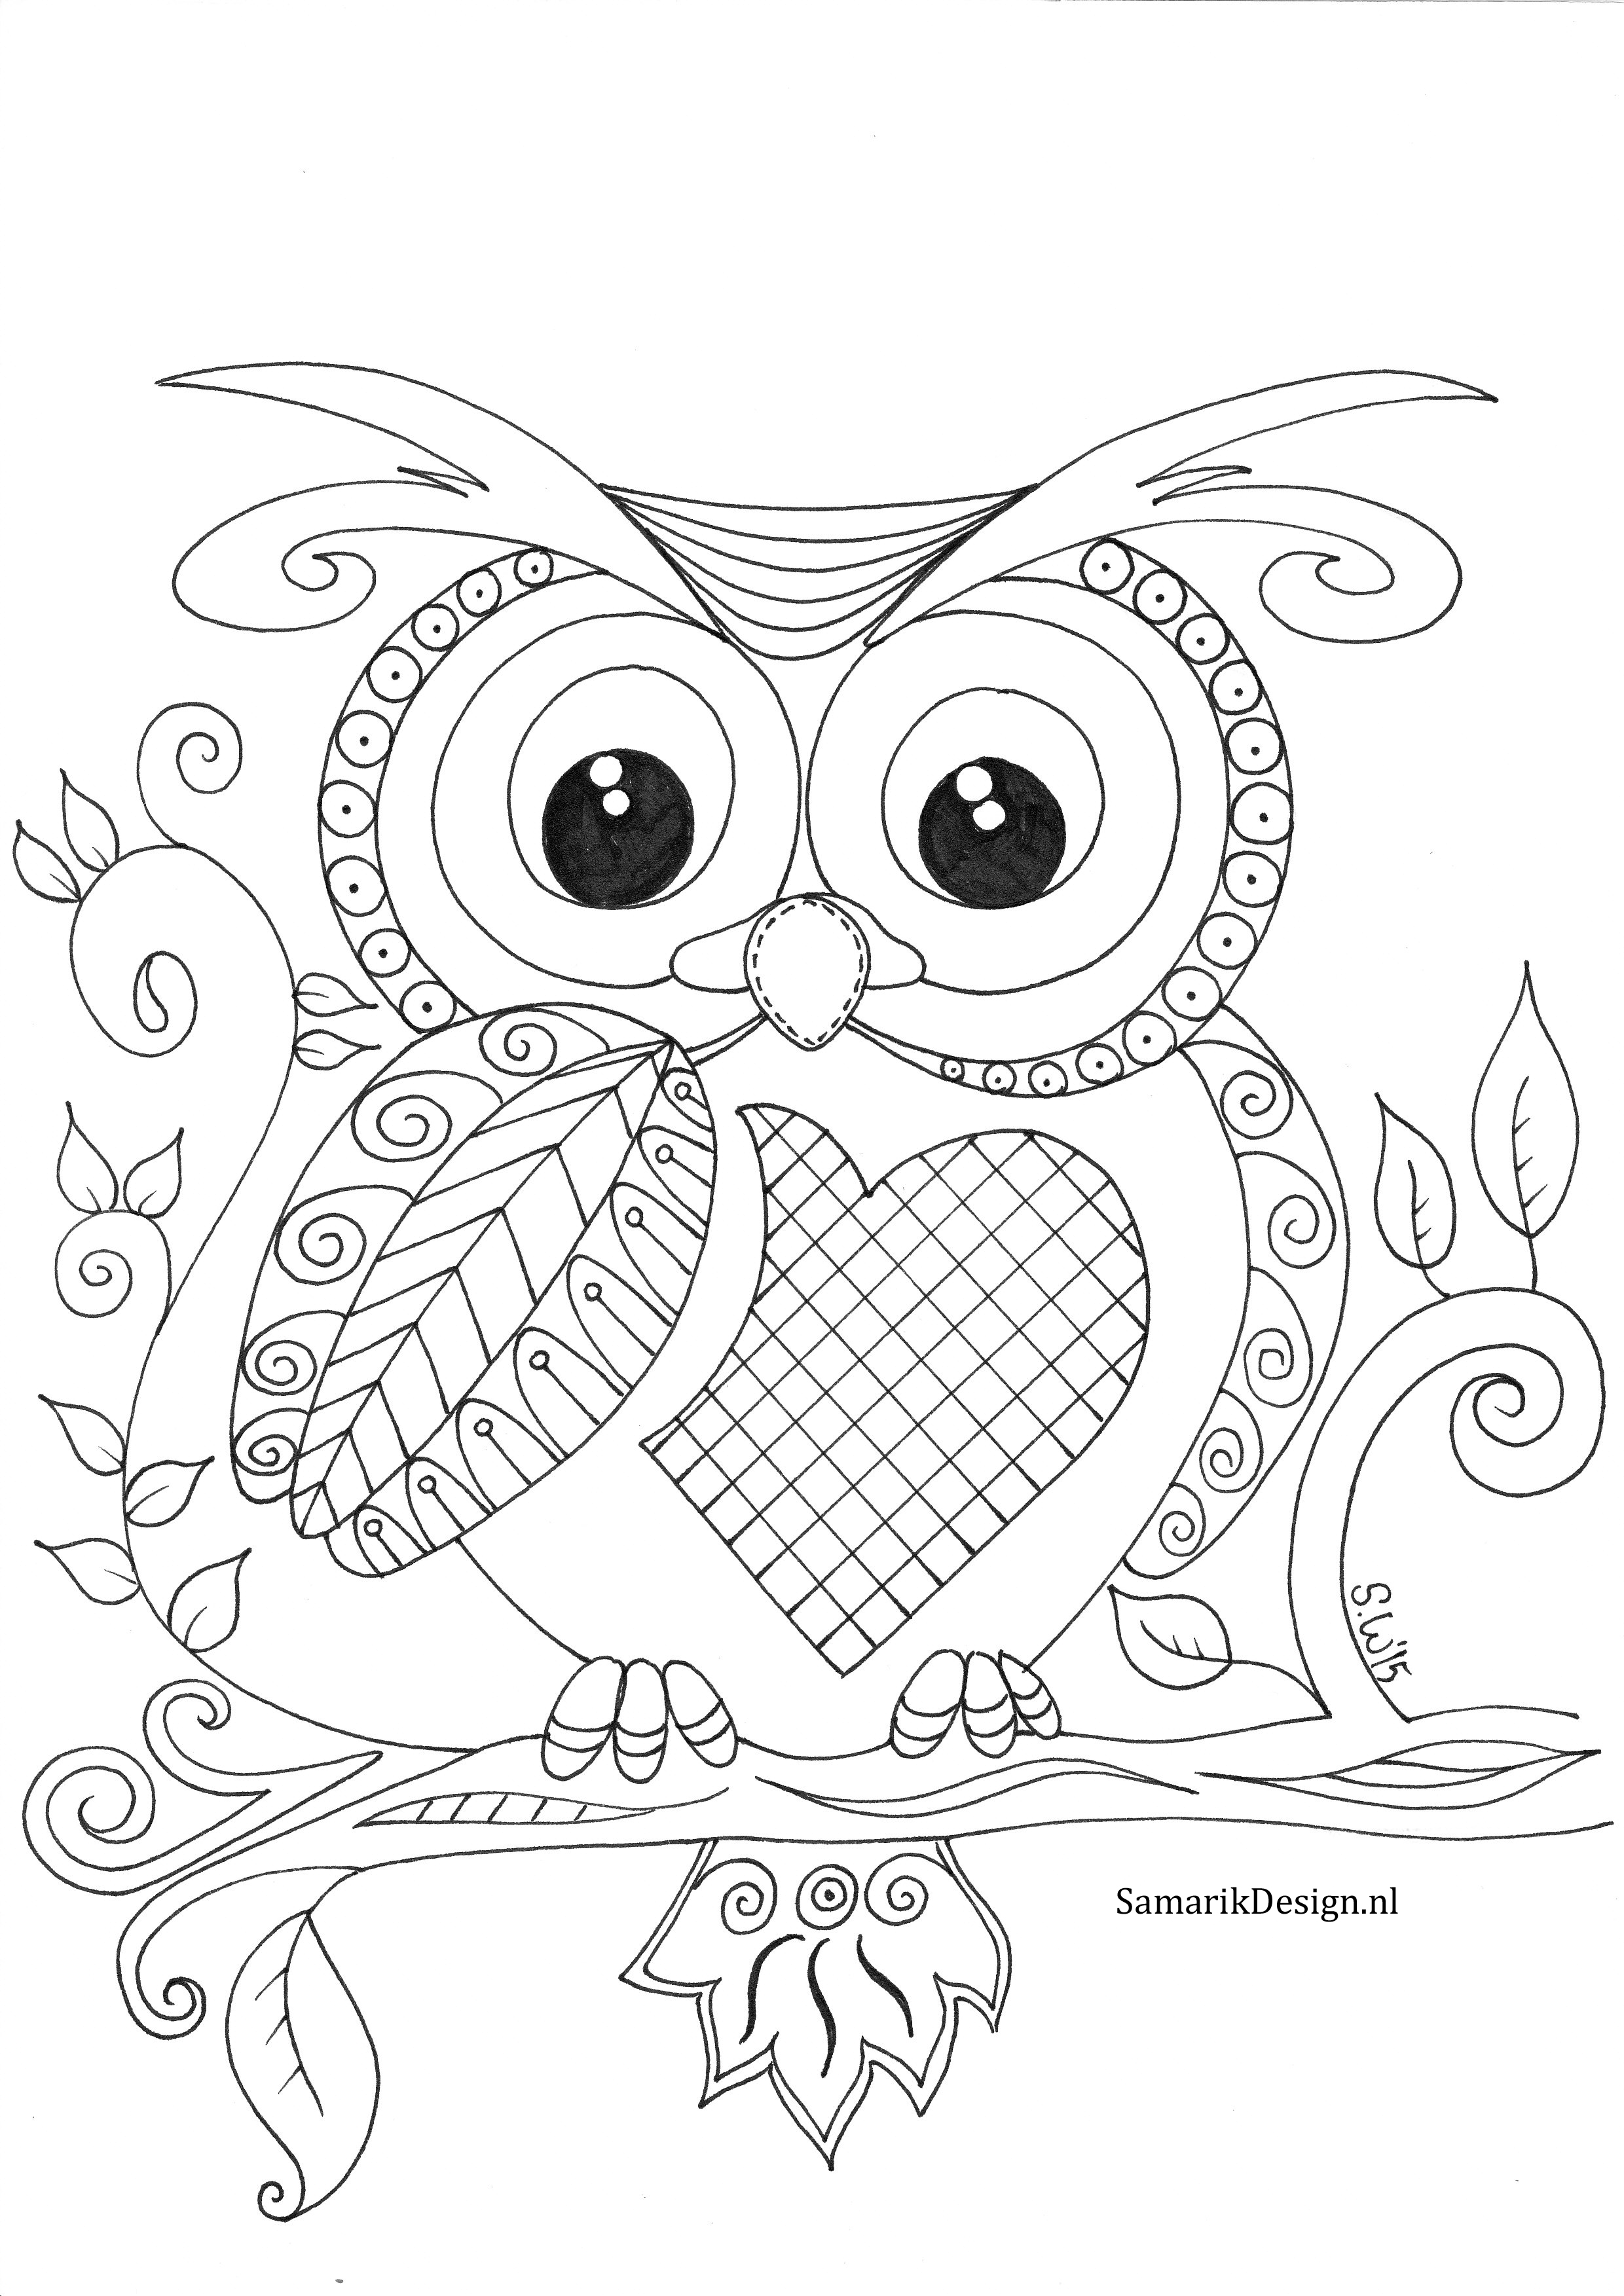 Owl Coloring Pages For Adults at GetColorings.com | Free printable